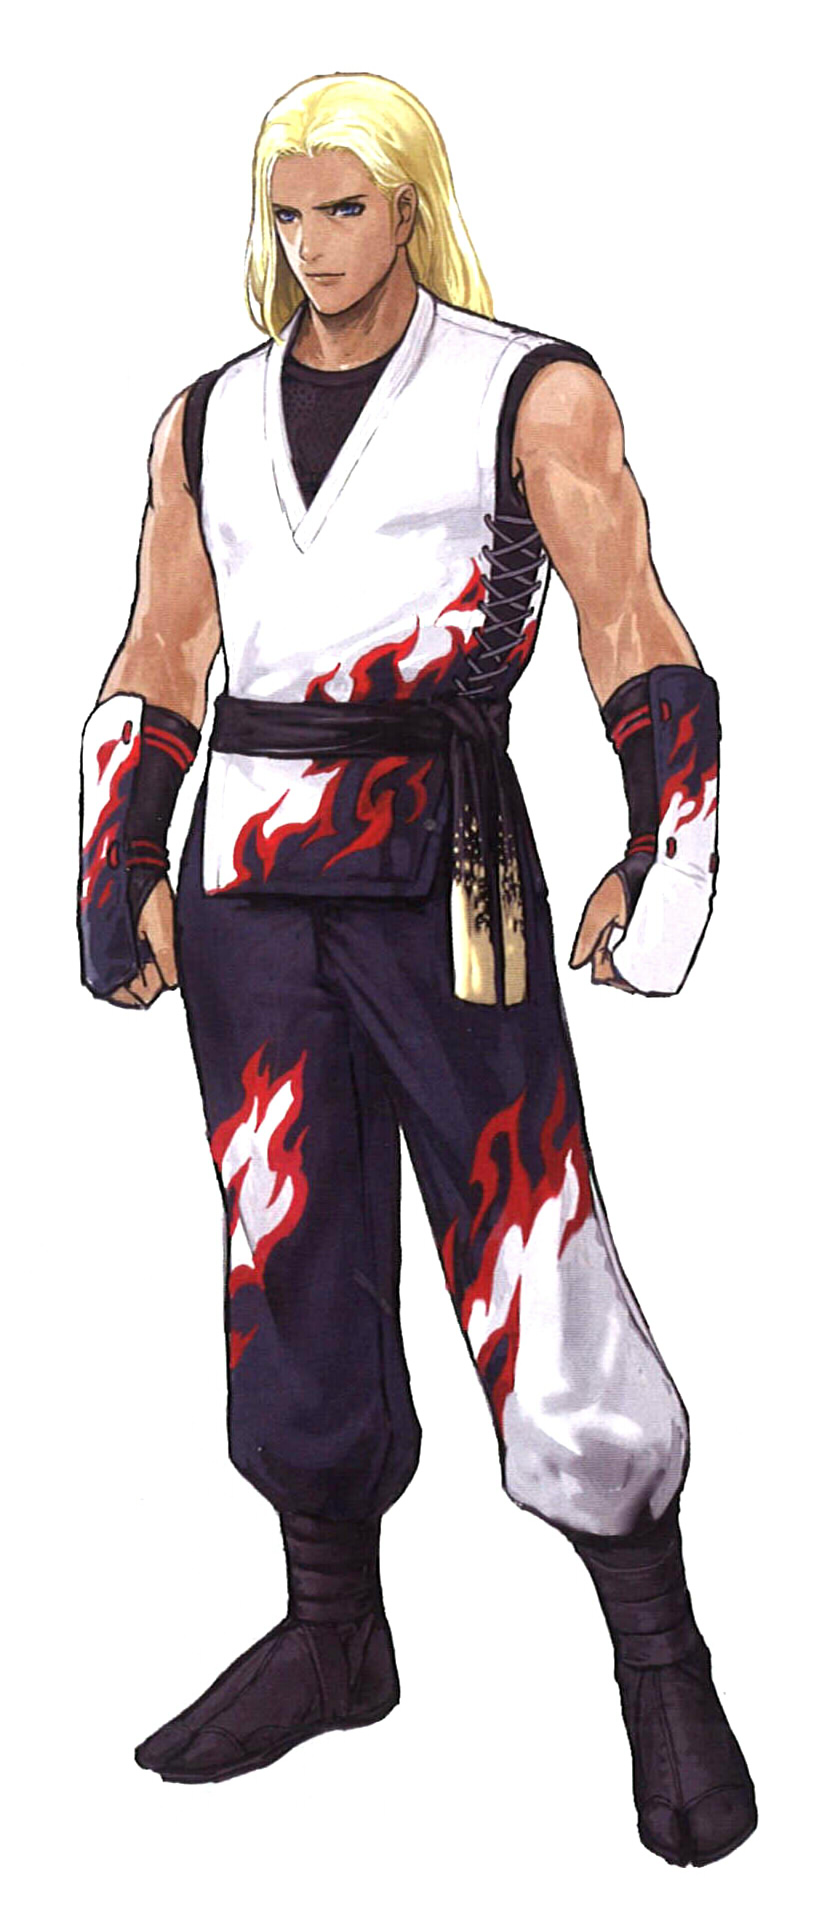 The King of Fighters '99, SNK Wiki